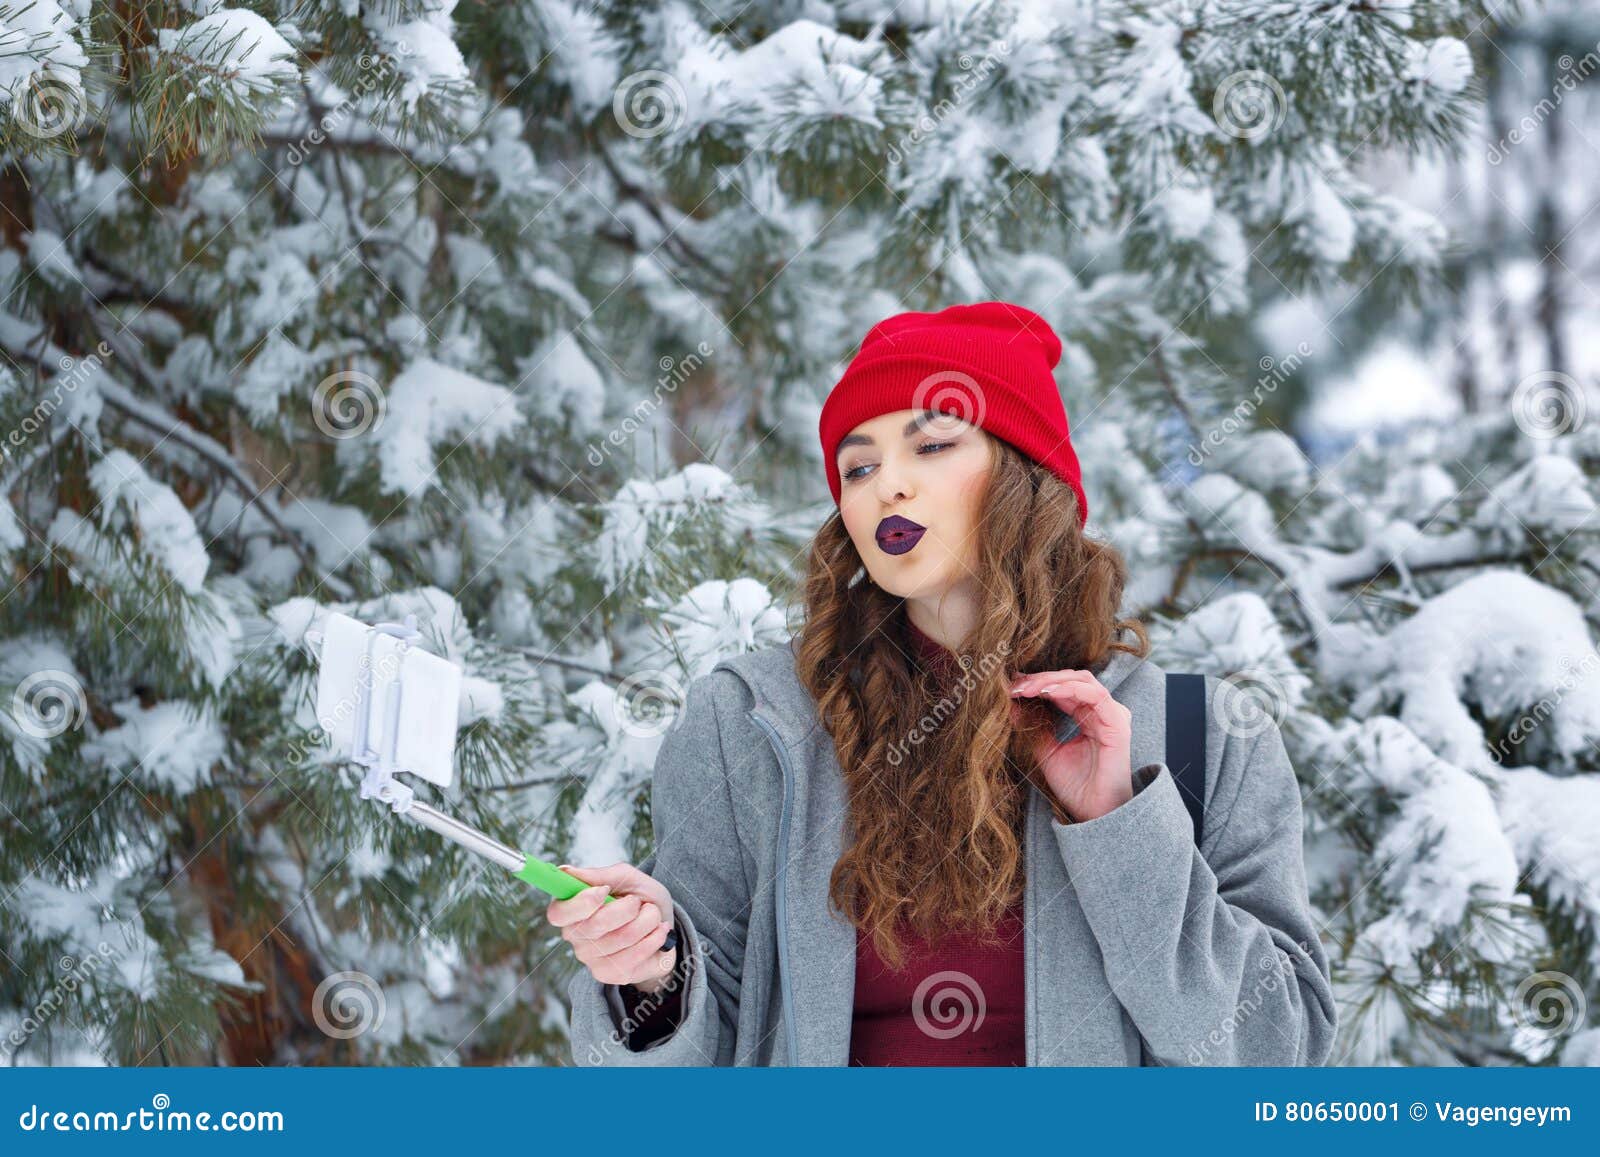 A woman in winter clothes walks in the park. Takes a selfie. There